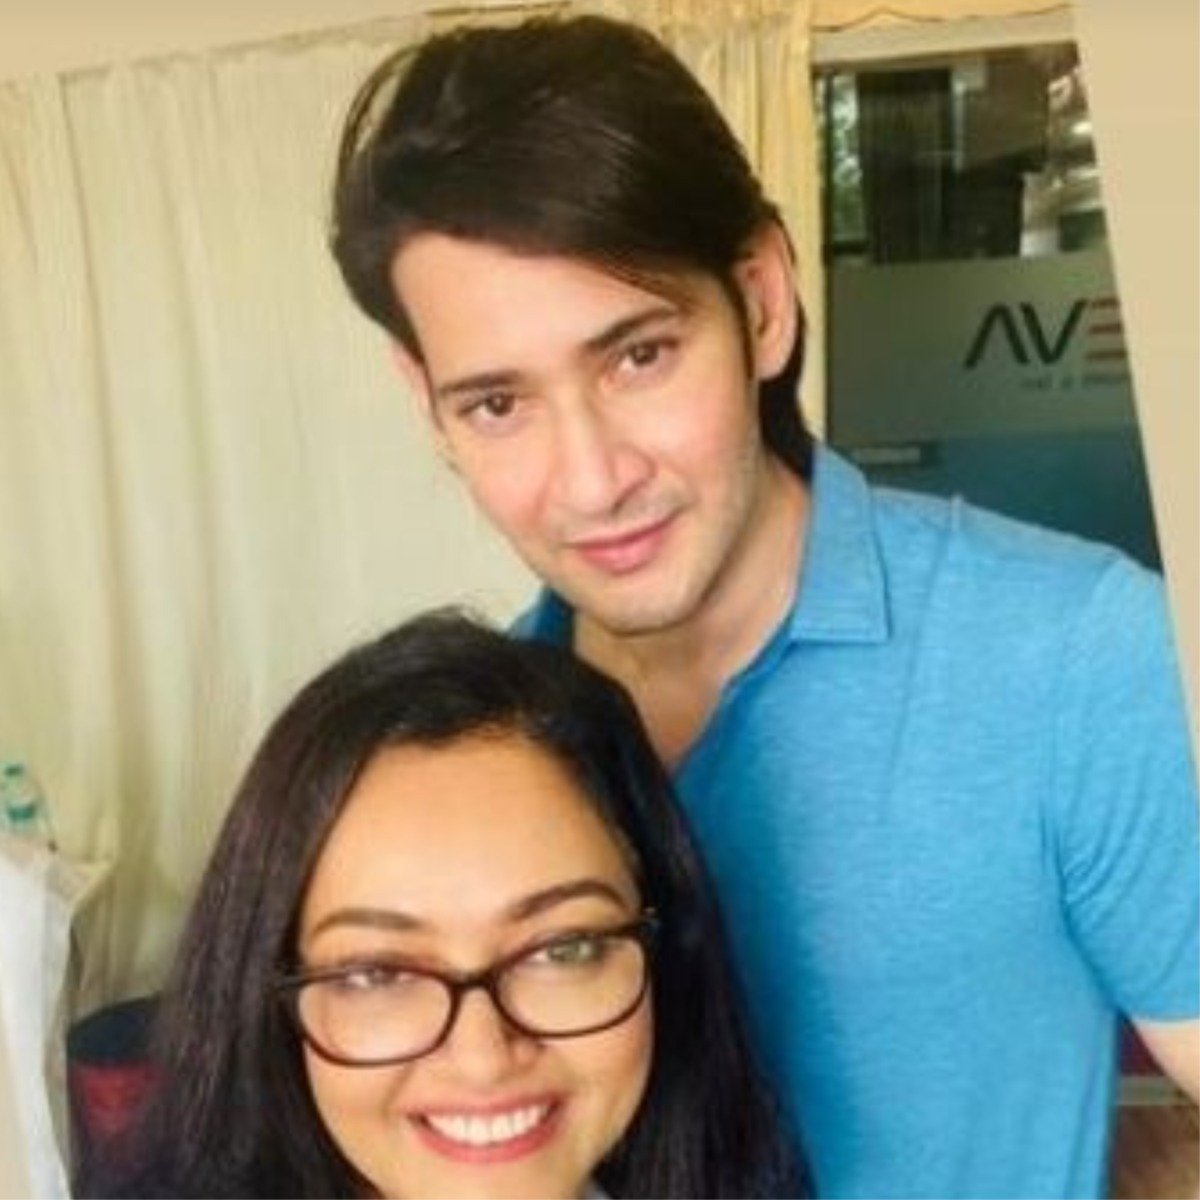 Mahesh Babu looks decades younger than his age as he flaunts his glowing skin in THIS latest photo